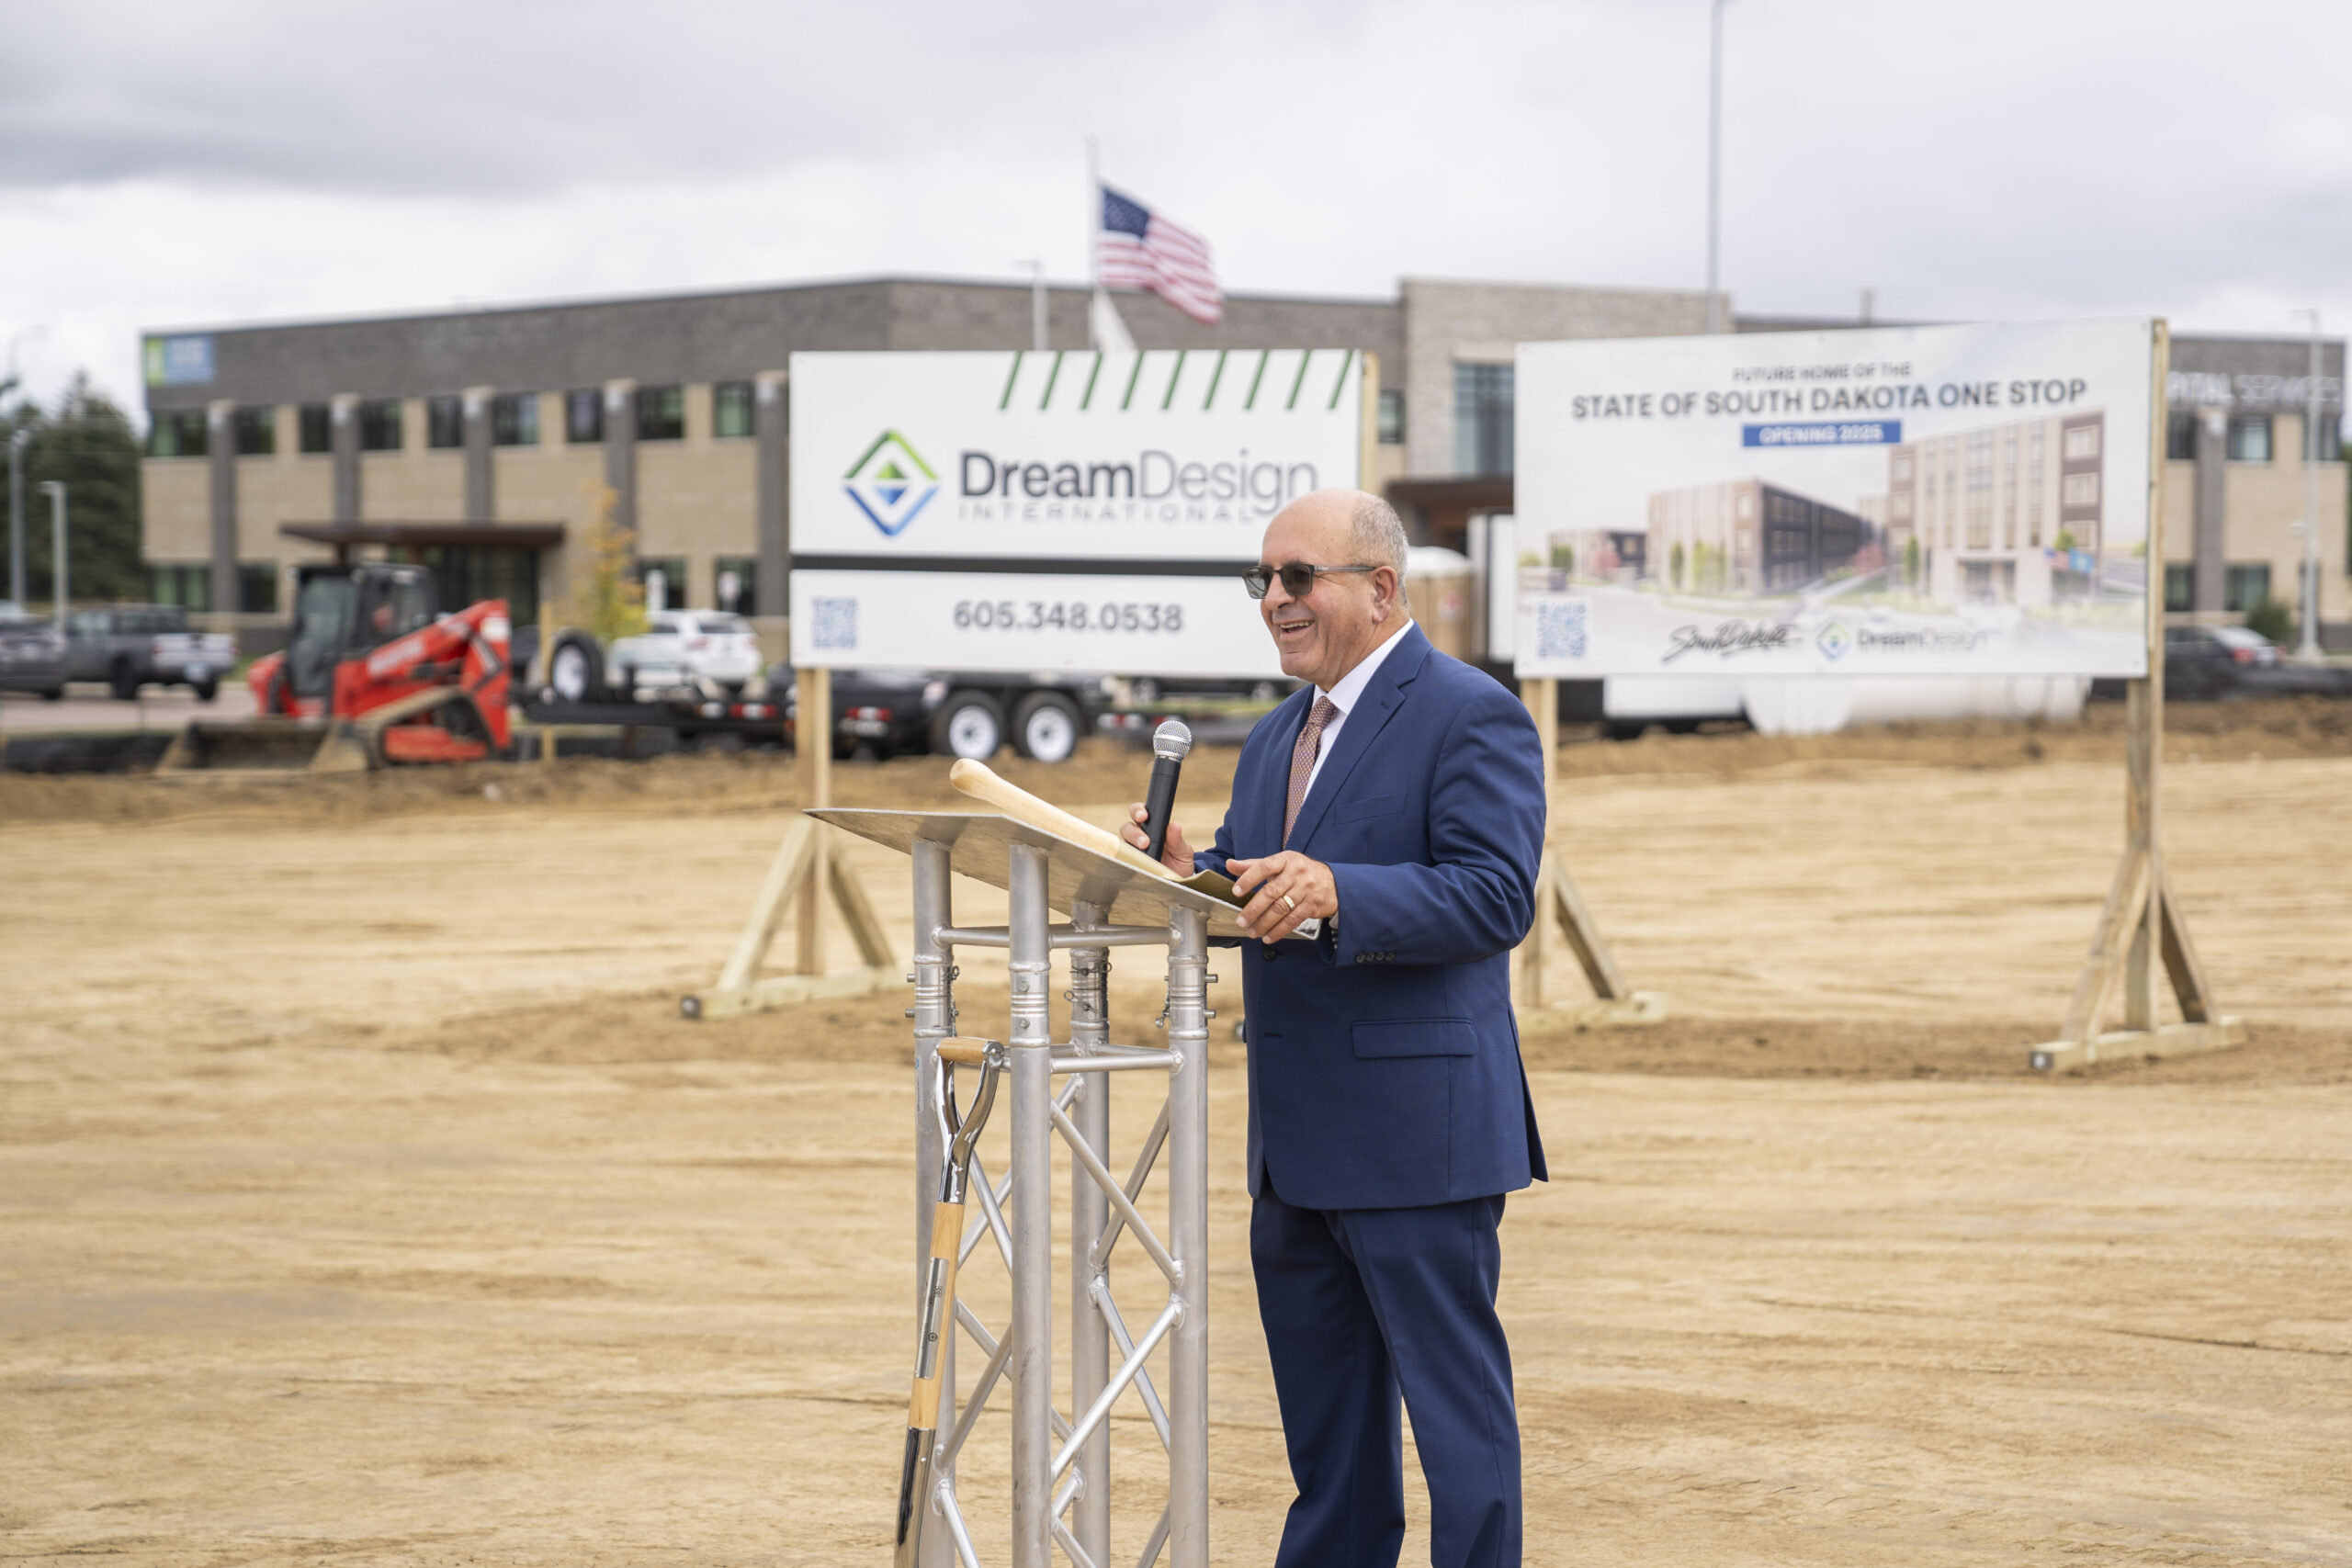 Hani Shafai speaks at State One Stop groundbreaking in Sioux Falls South Dakota